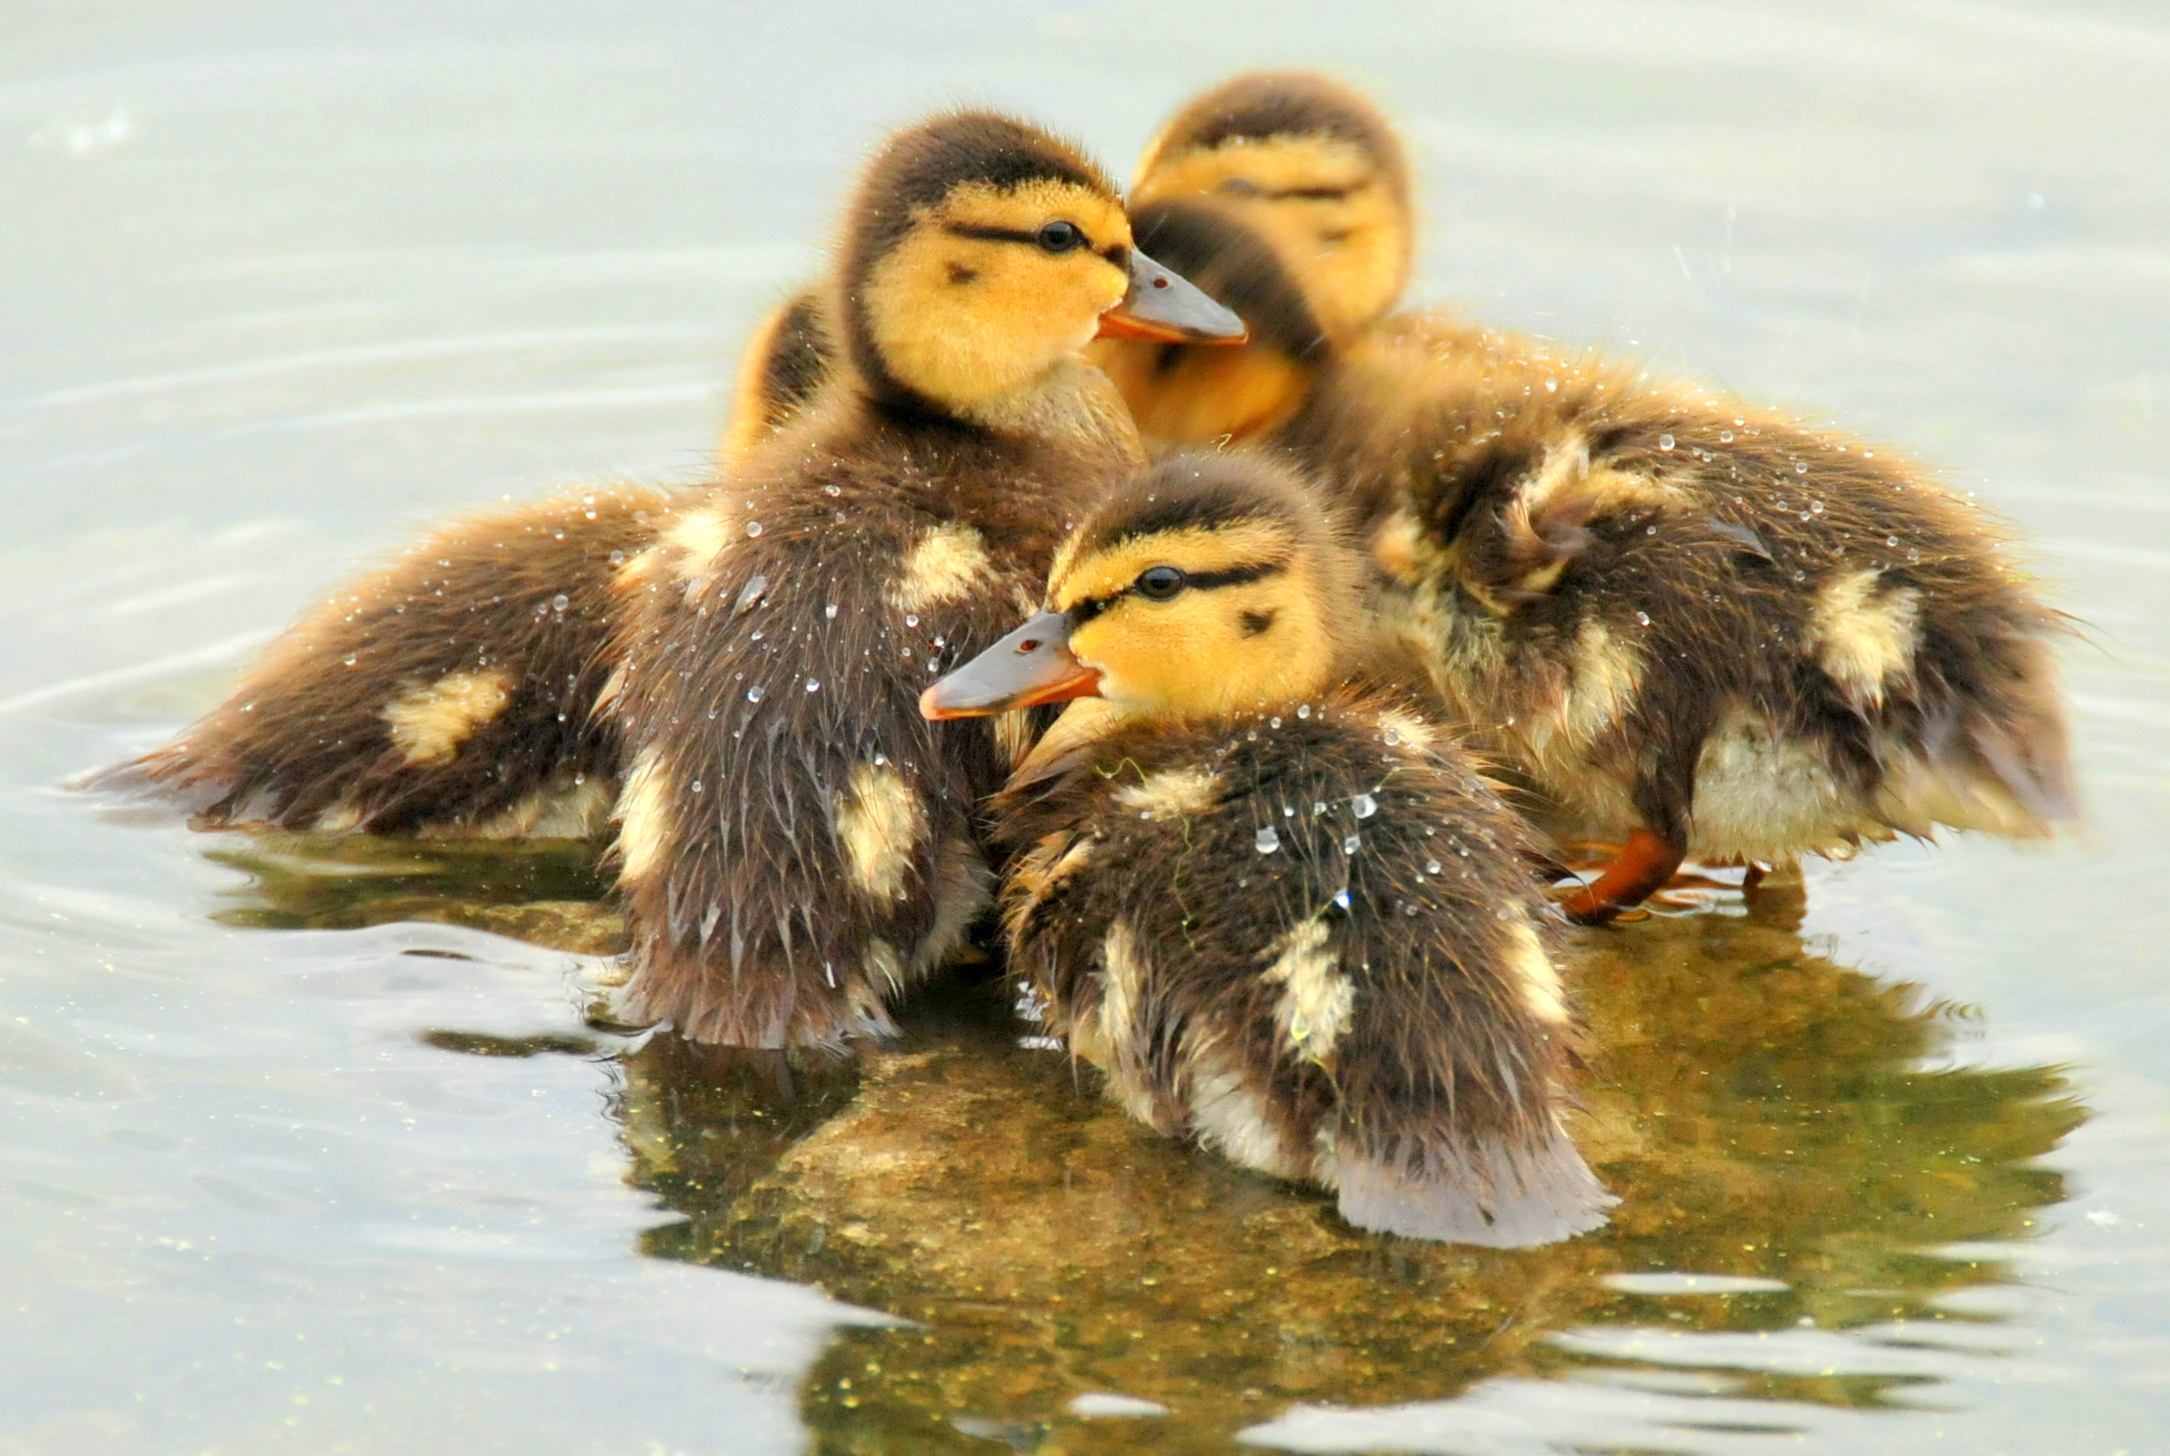 four baby ducks are playing on the water